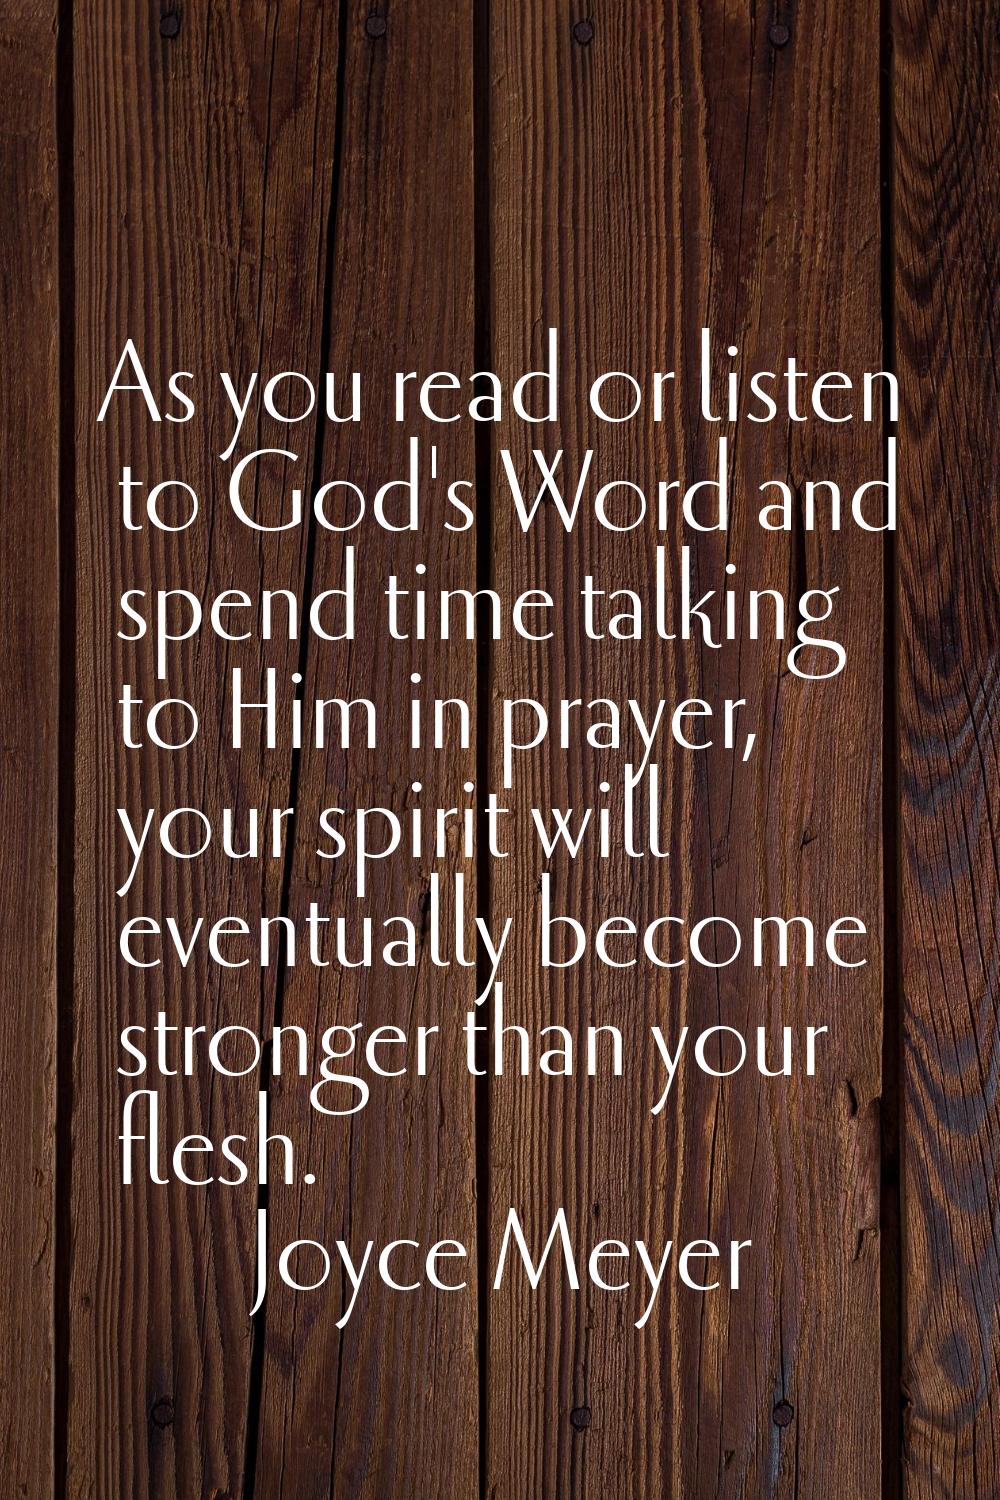 As you read or listen to God's Word and spend time talking to Him in prayer, your spirit will event